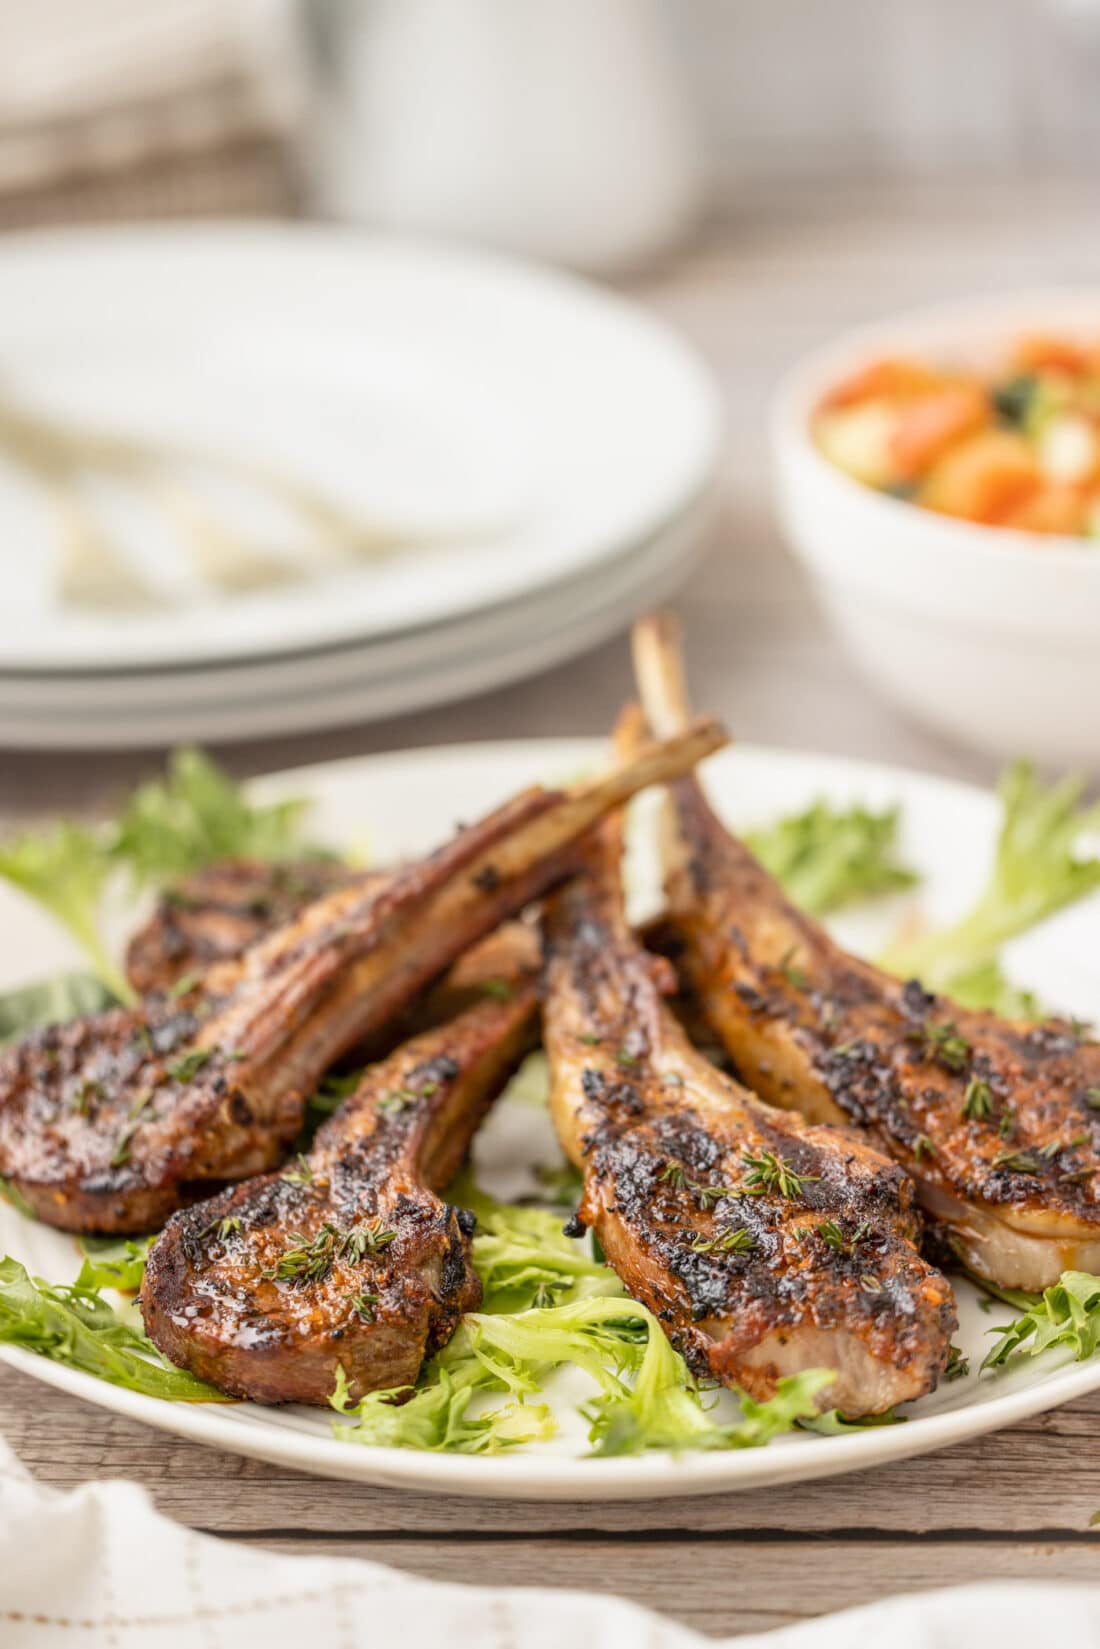 Grilled Lamb Chops on a bed of lettuce